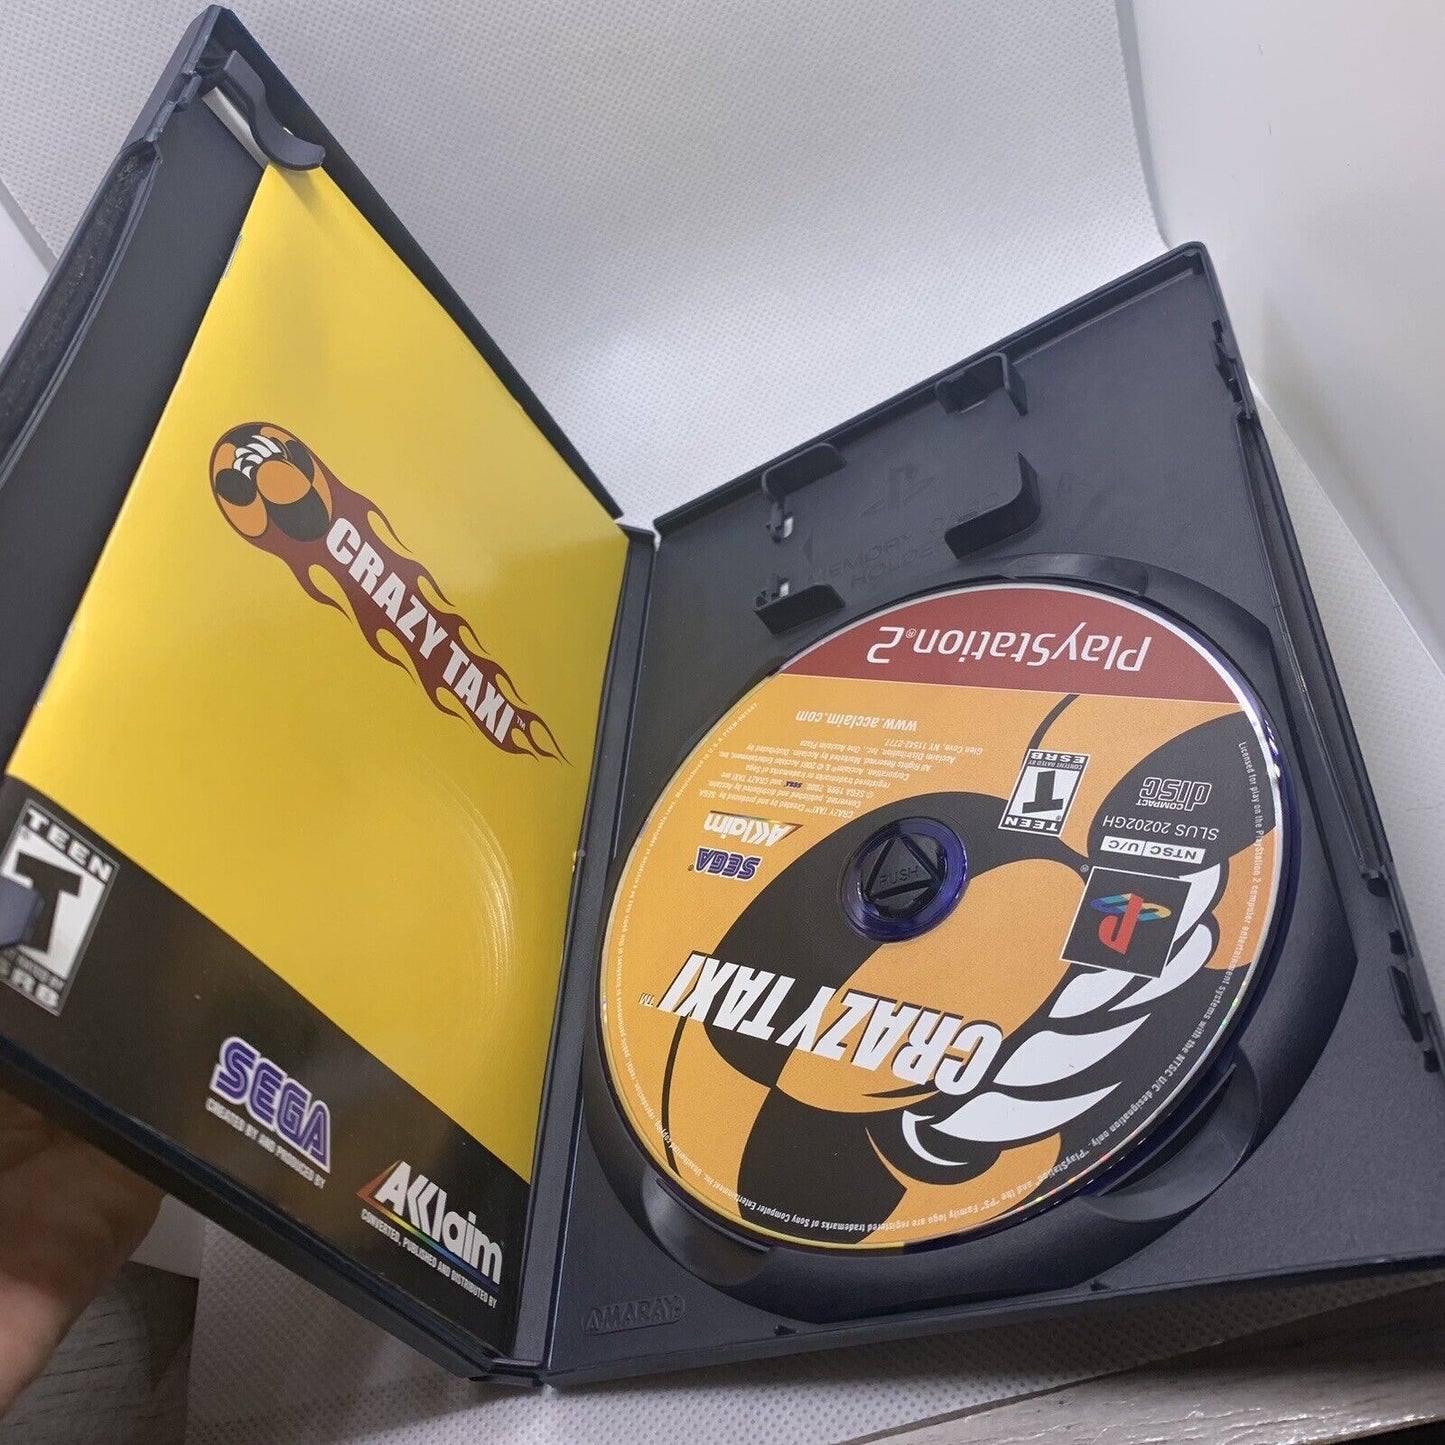 Crazy Taxi - Sony PLaystation 2, PS2 Video Game - COMPLETE CIB Tested, Working!